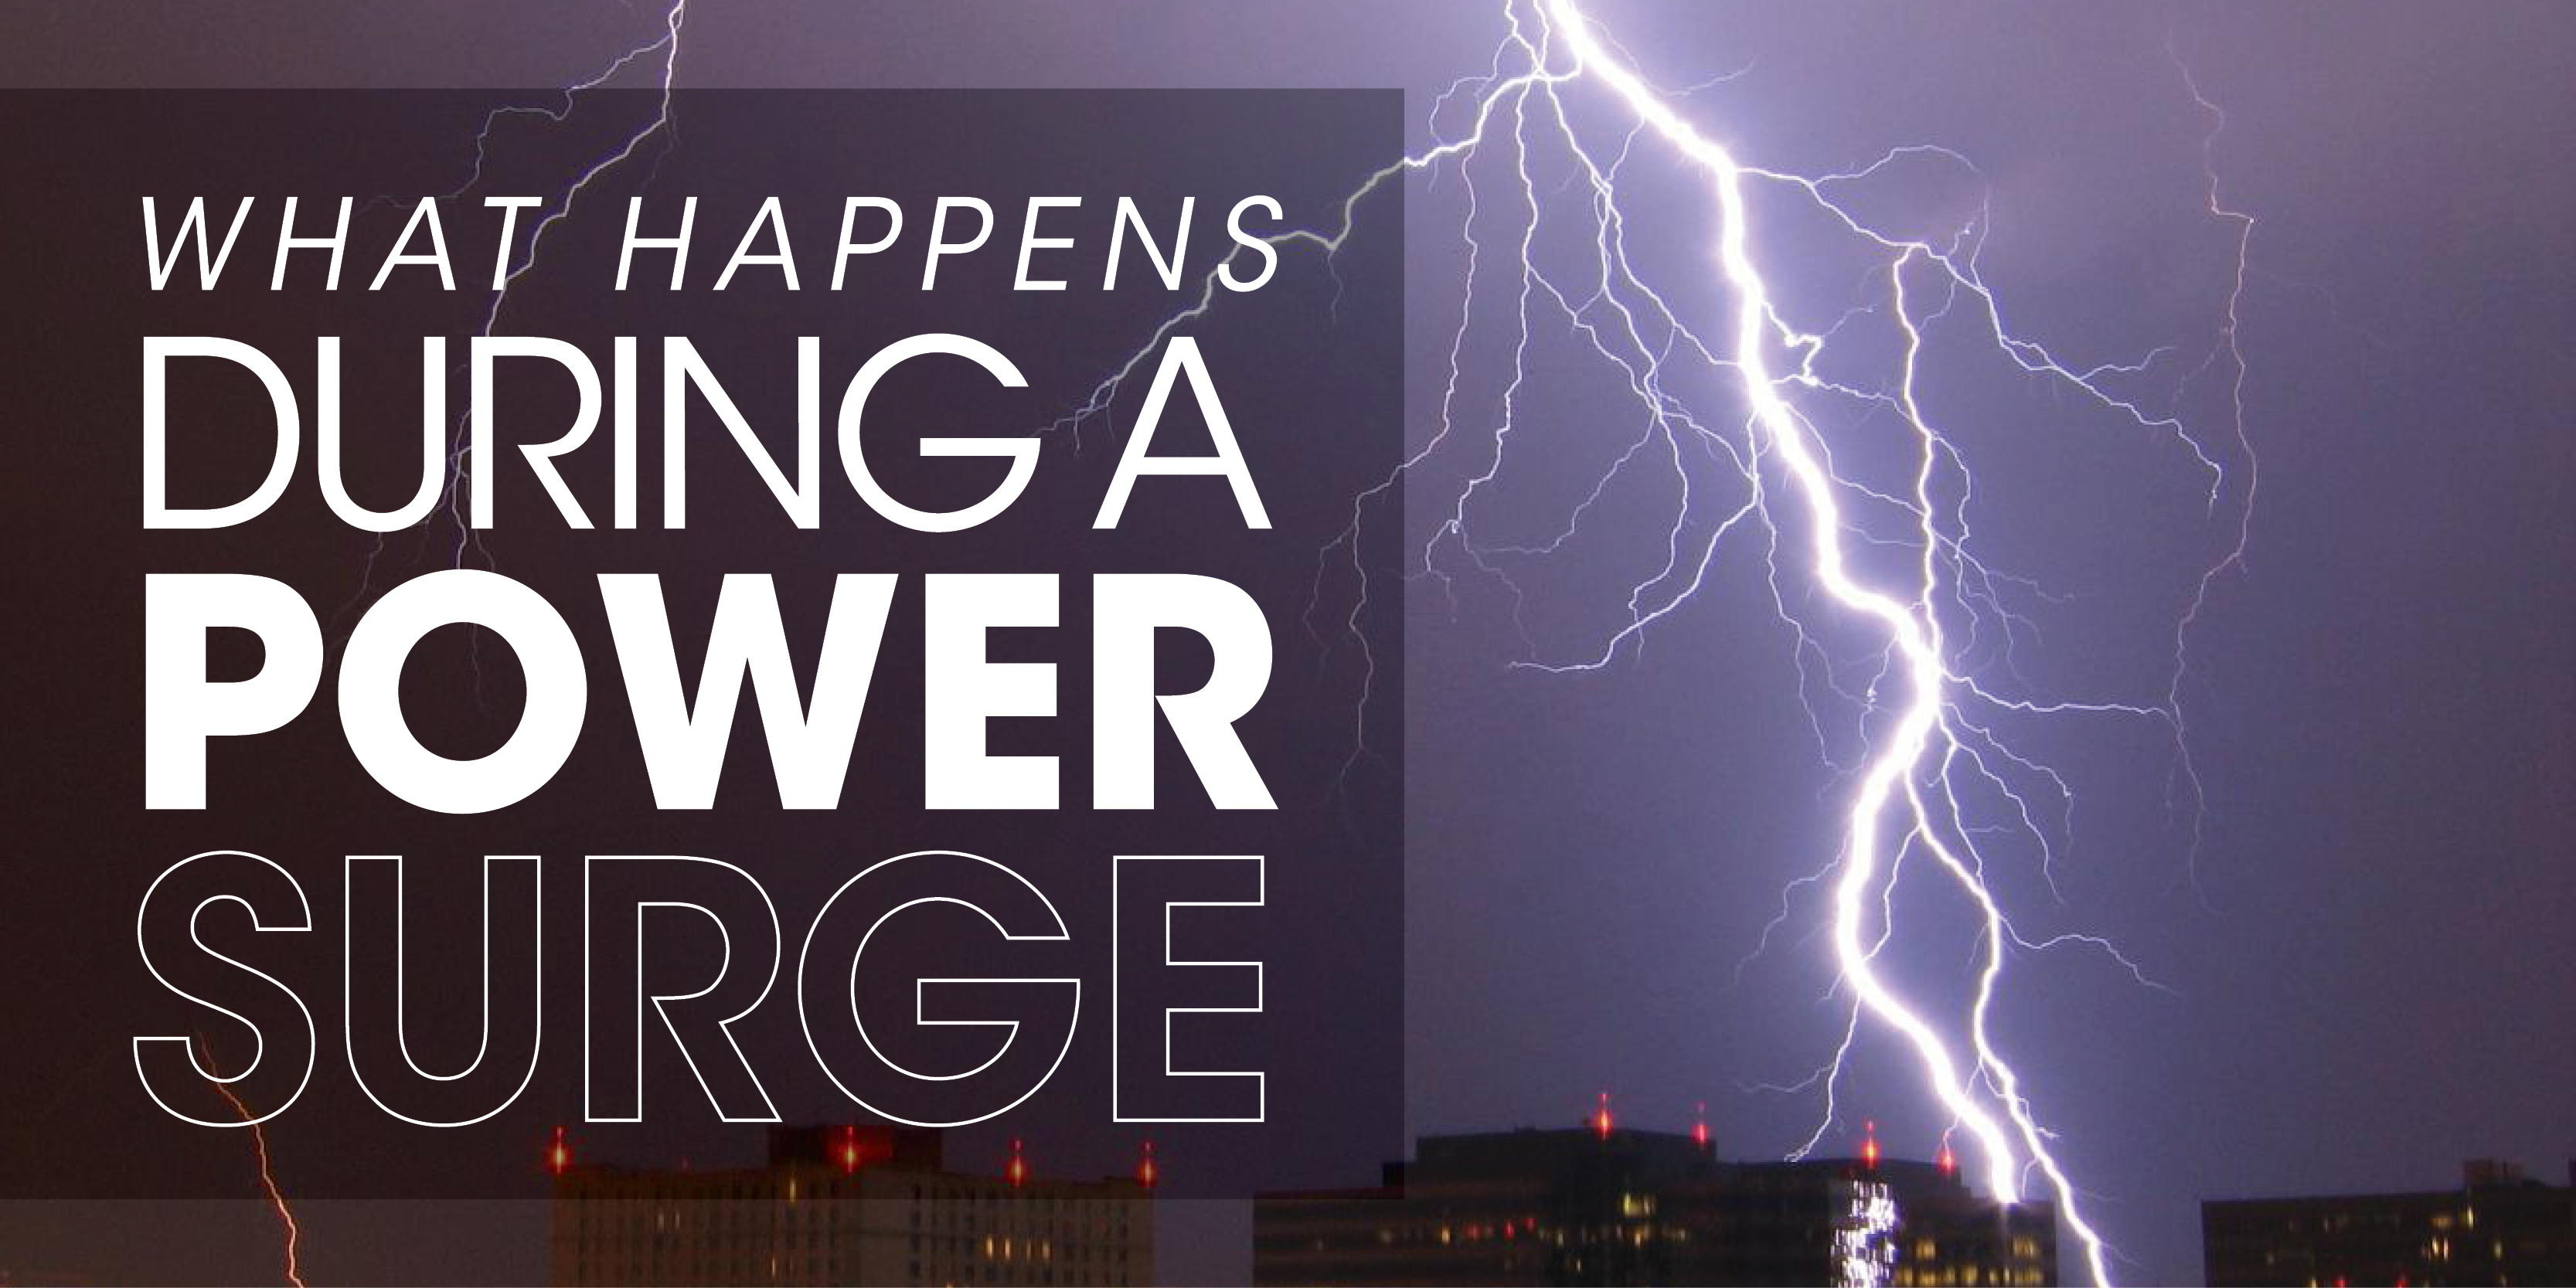 Lightning at night with text: "what happens during a power serge